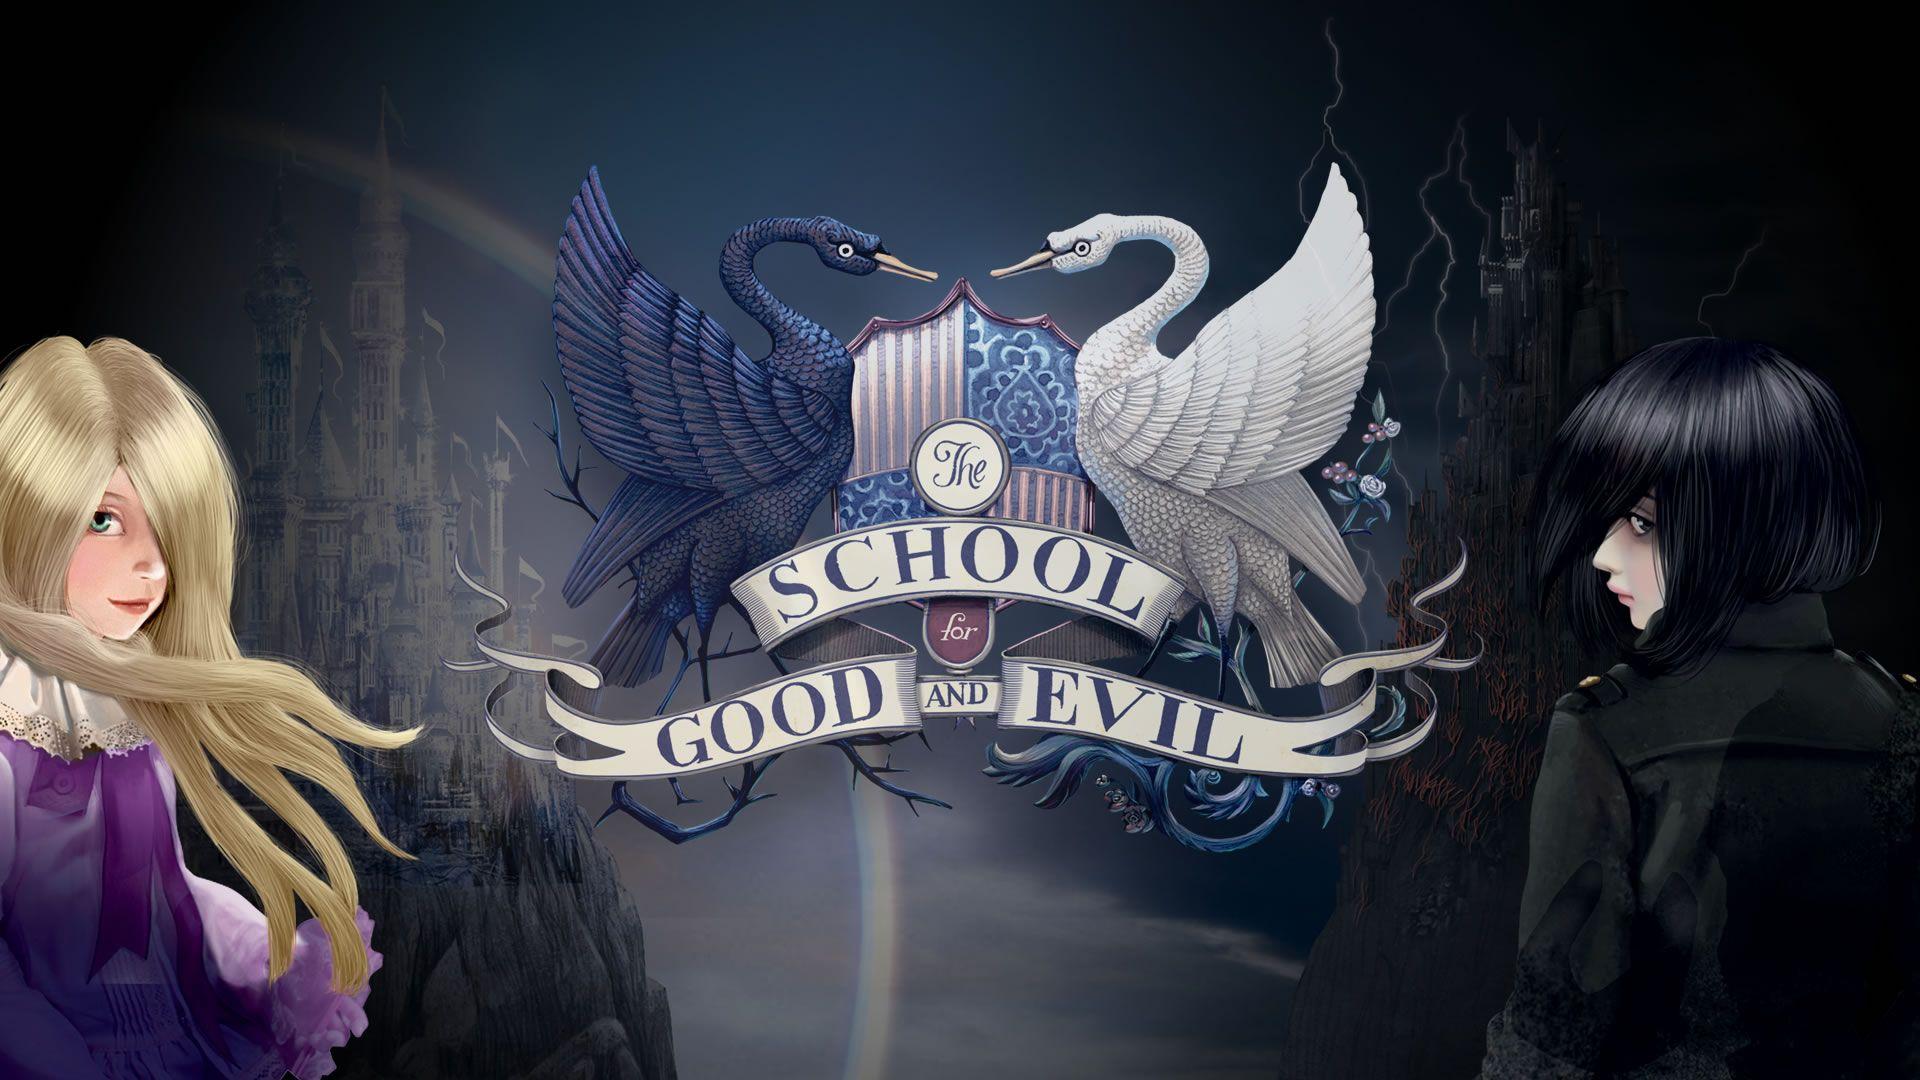 Wallpaper, artifacts & more. School for Good and Evil